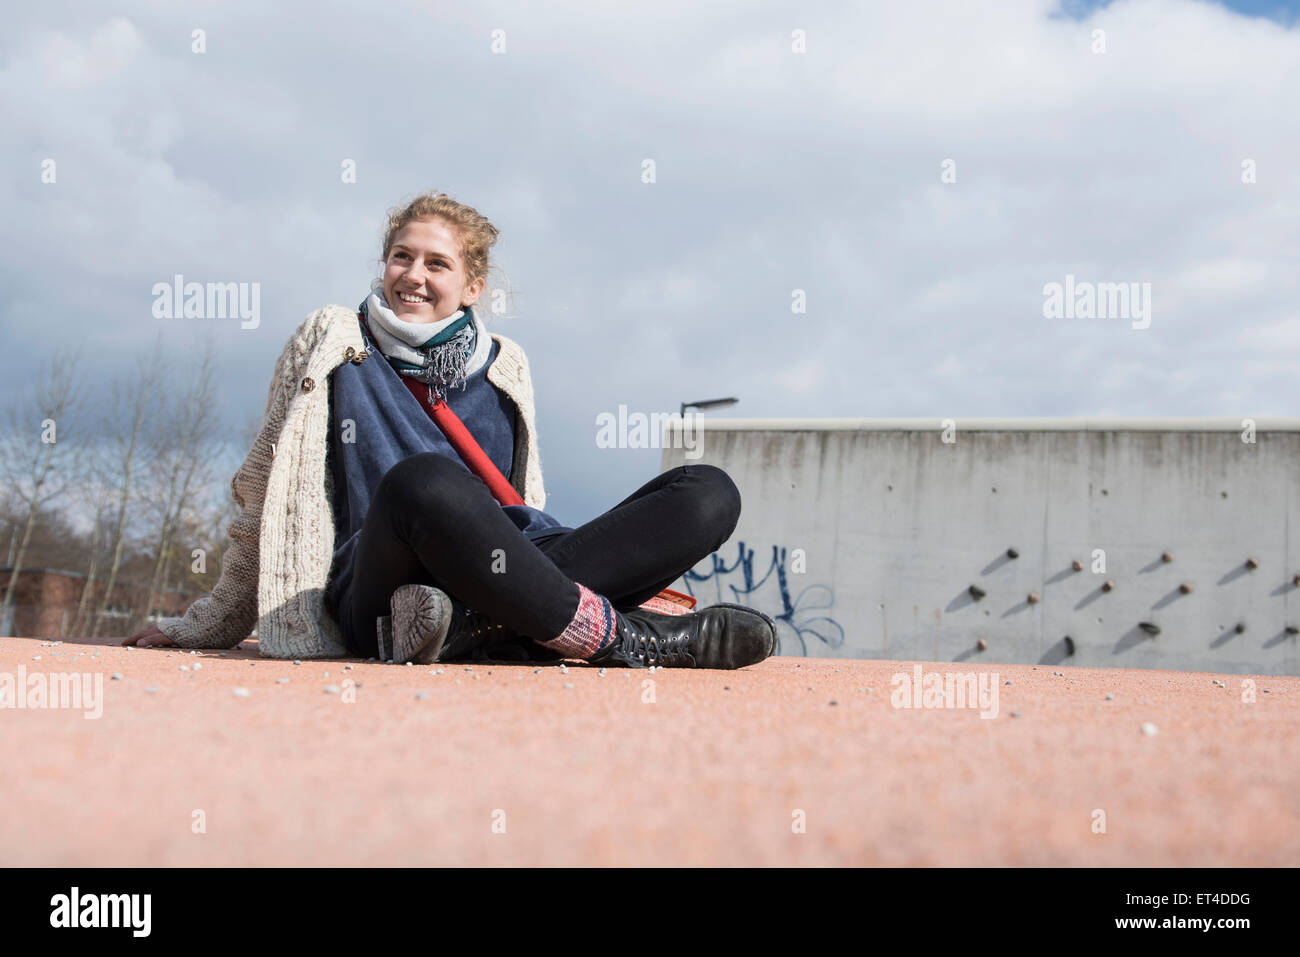 Young woman sitting cross-legged on playground turntable and smiling Munich Bavaria Germany Stock Photo